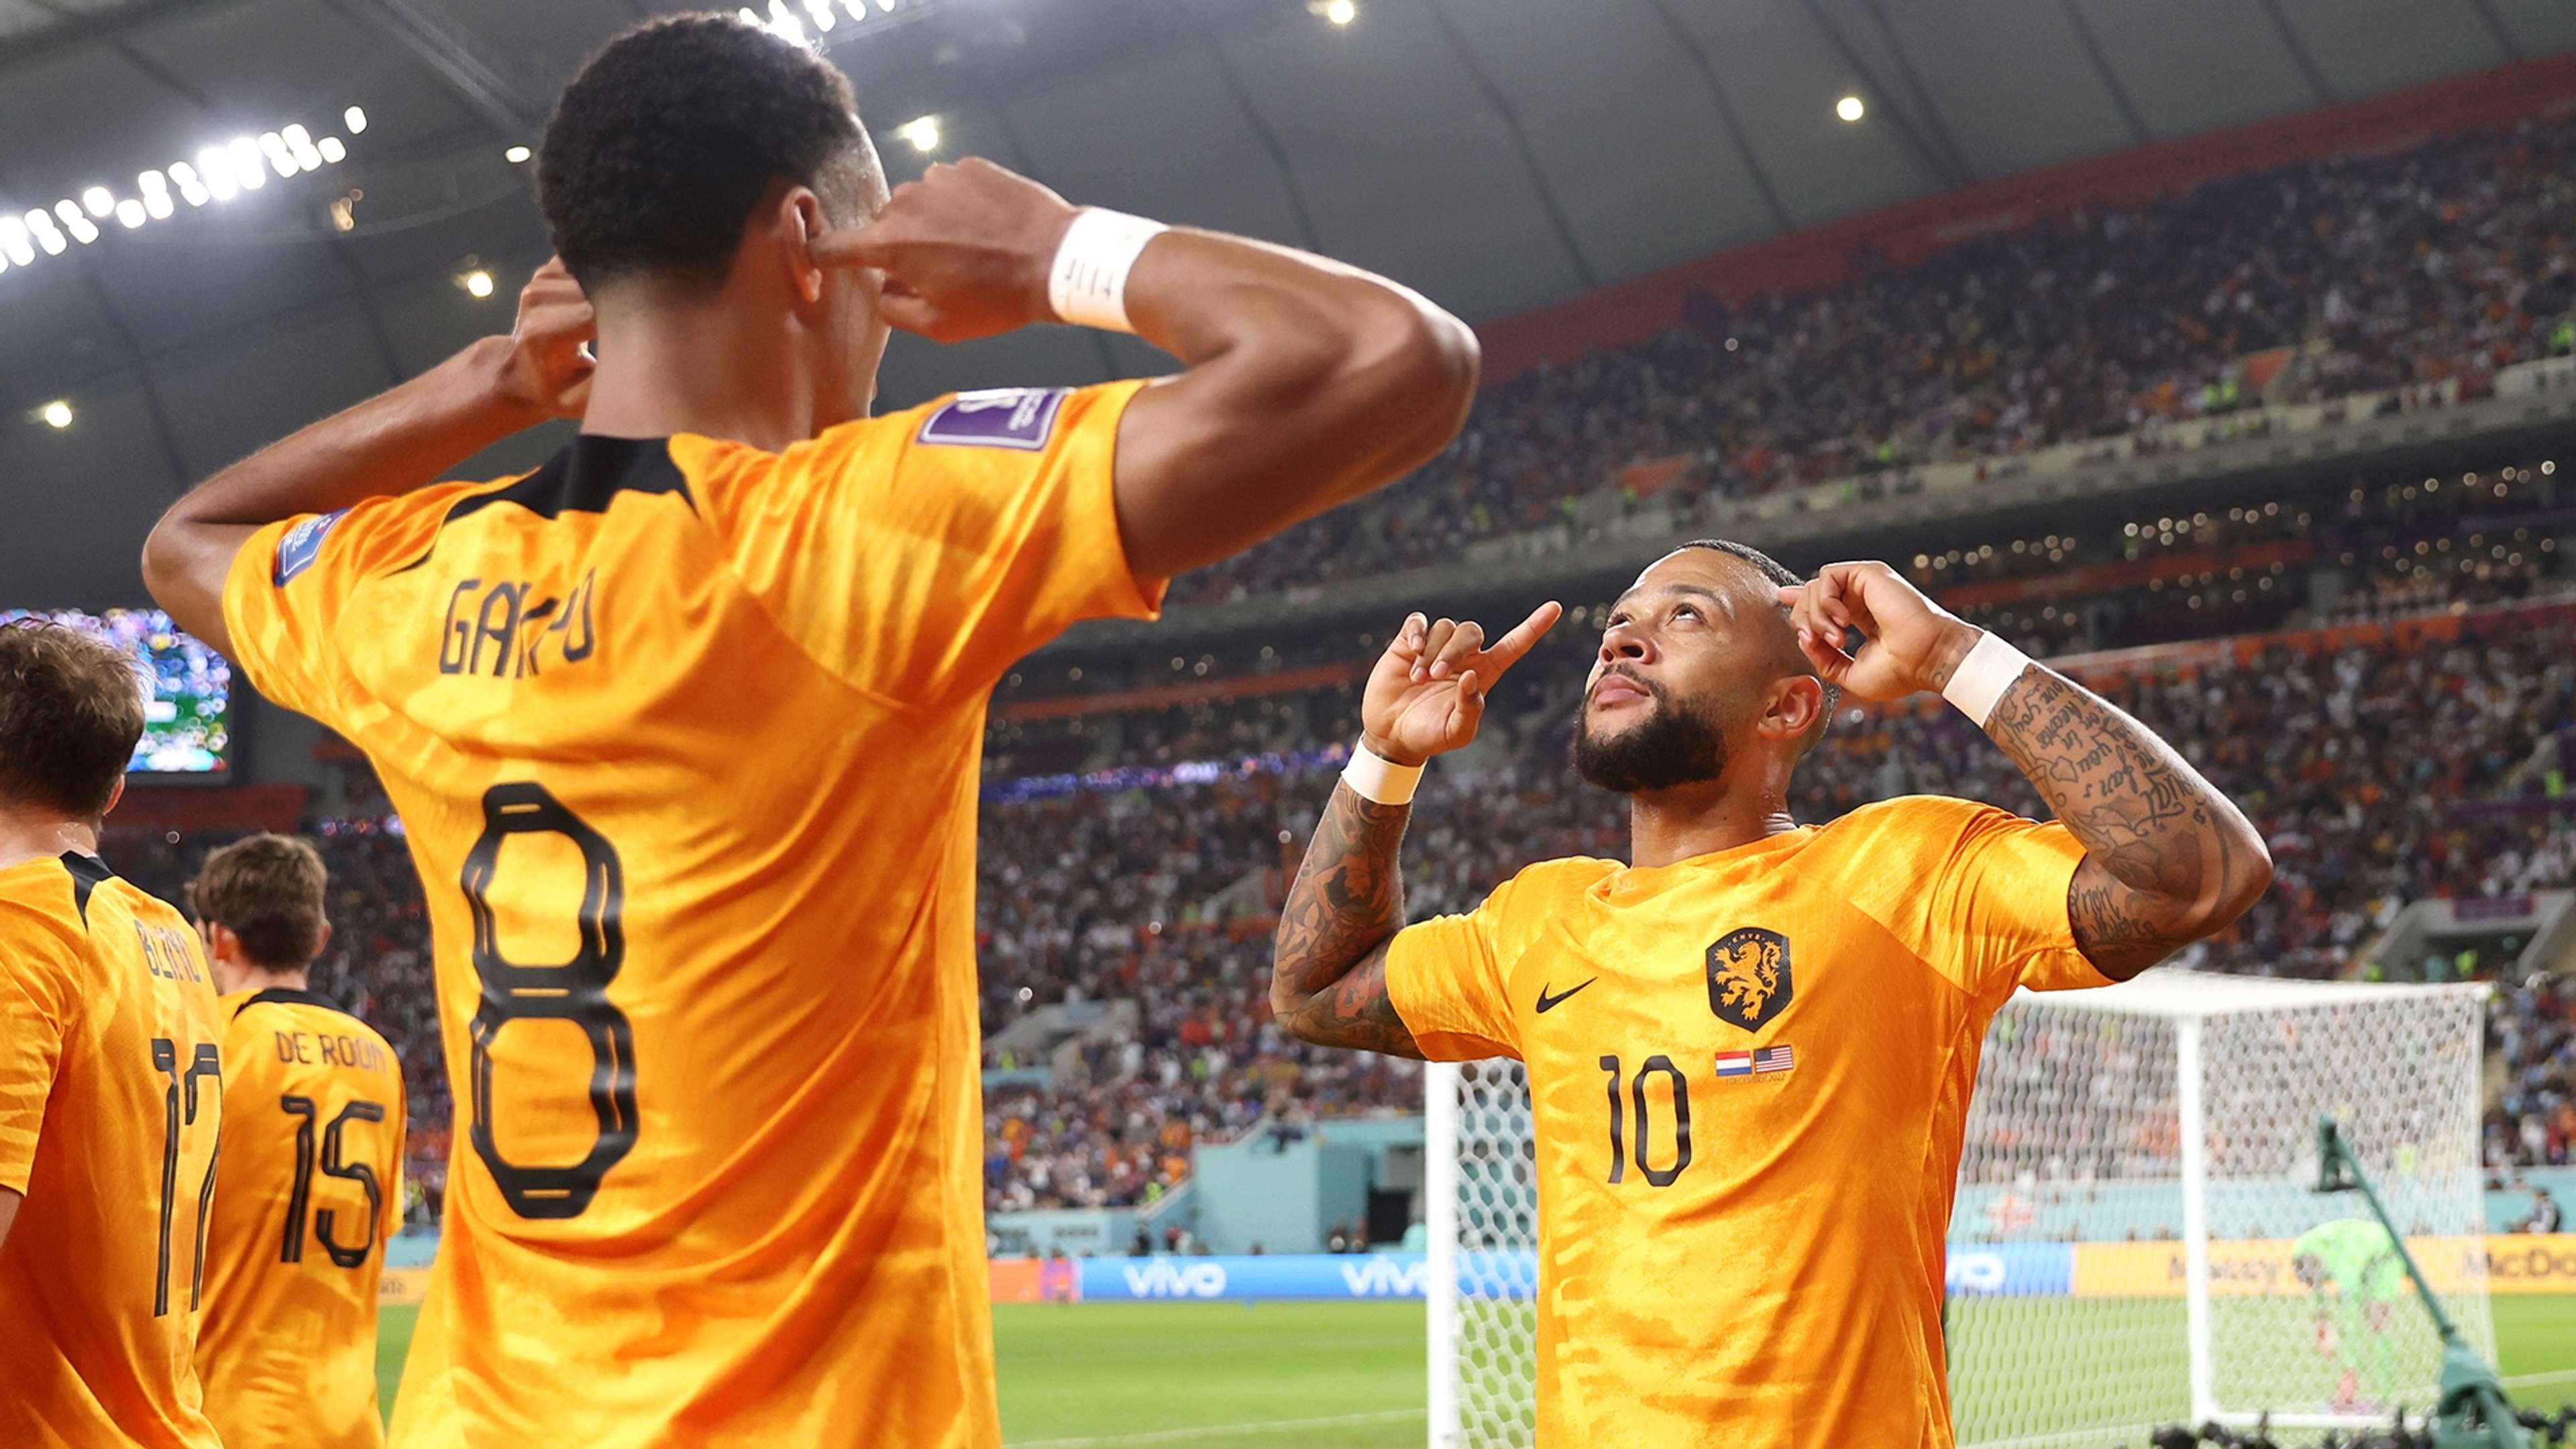 Memphis Depay Cody Gakpo Netherlands USA 2022 World Cup